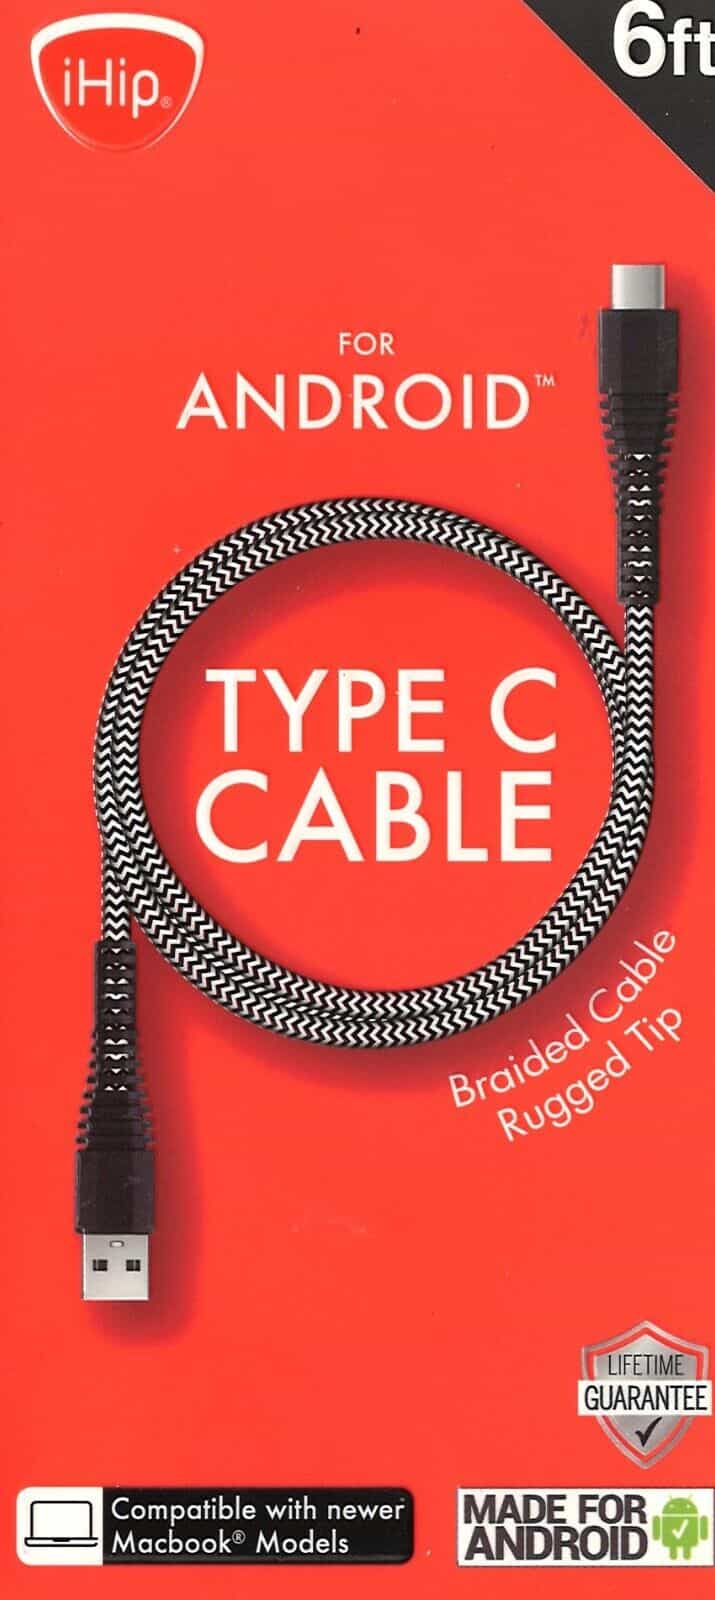 iHip USB Type-C Fast Charge Braided Cell Phone Cable for Android 6ft Brand New